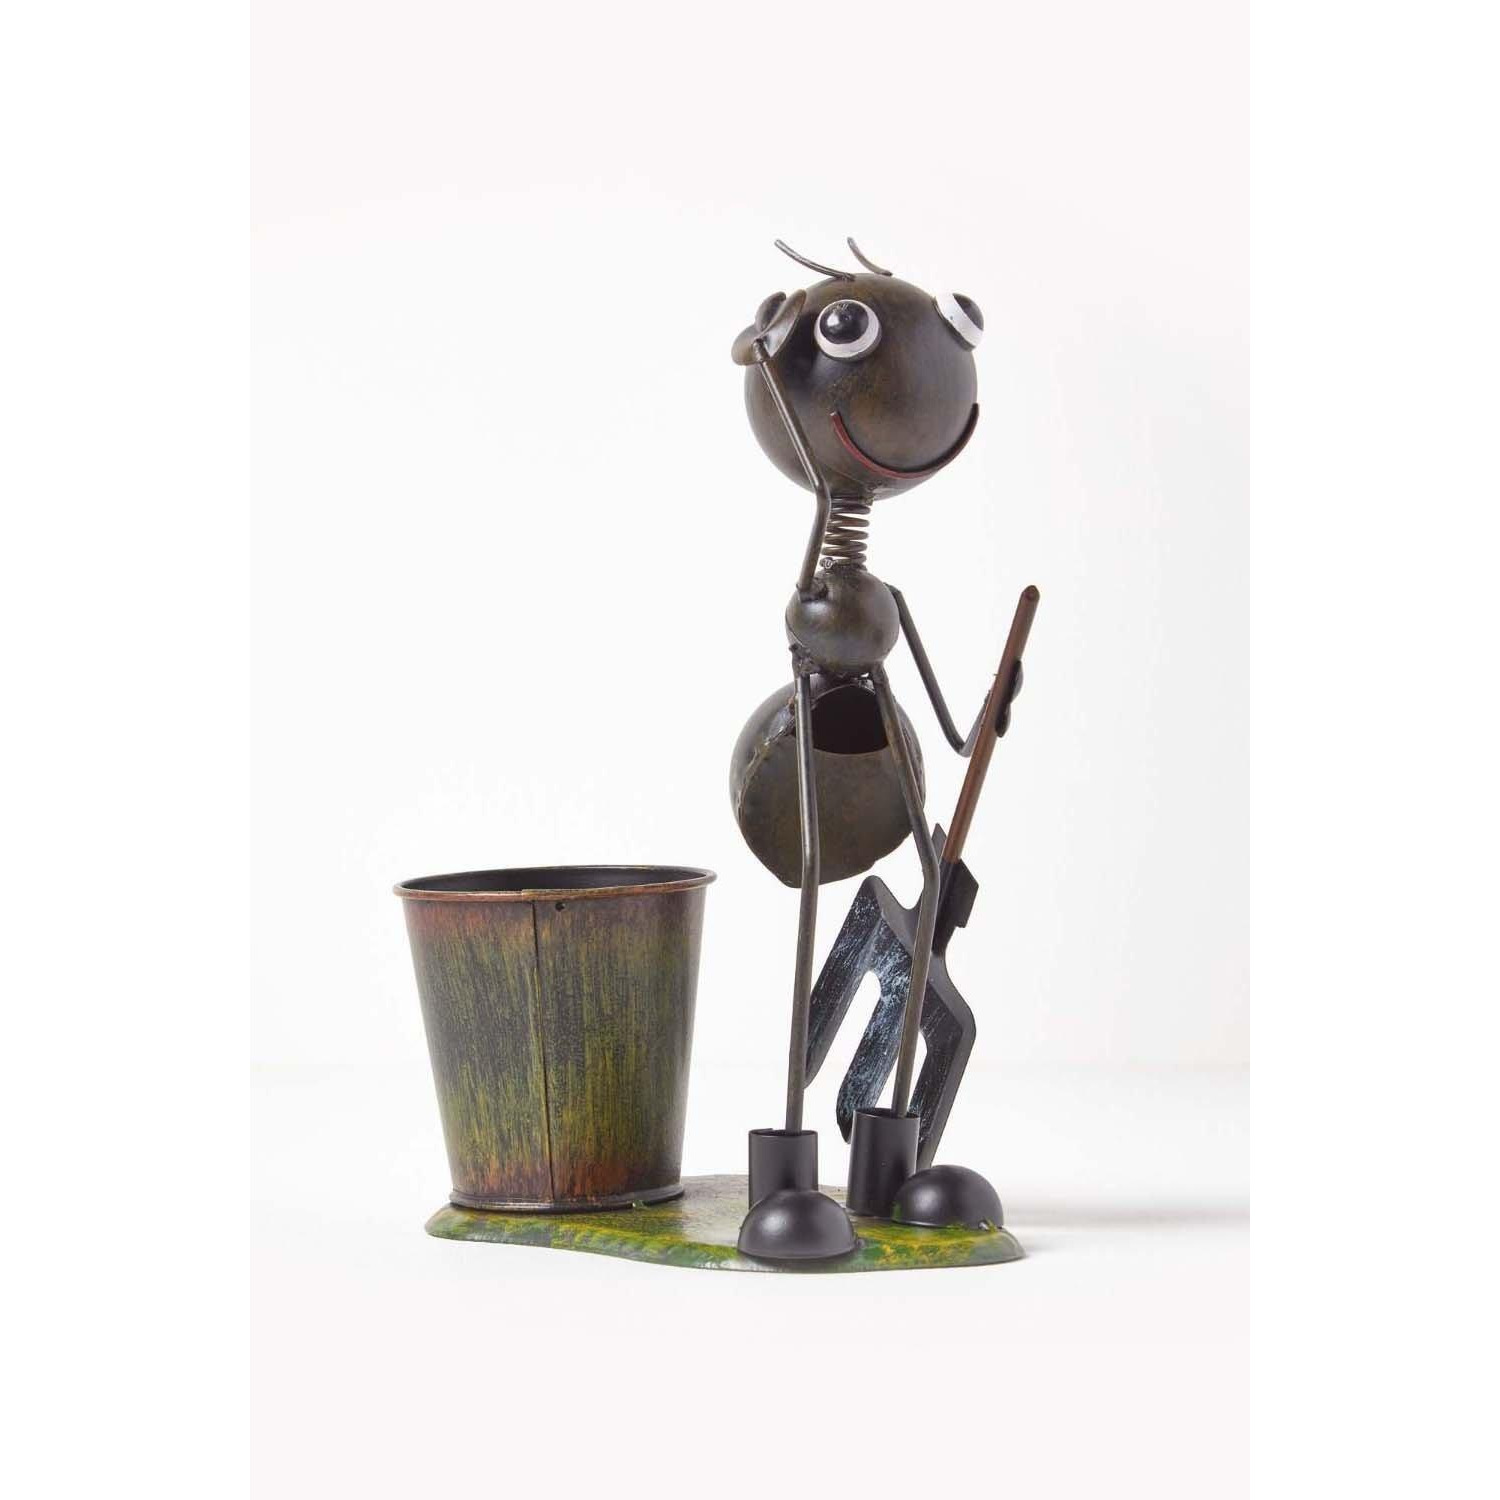 Metal Ant with Garden Fork and Flower Pot, 32 cm Tall - image 1